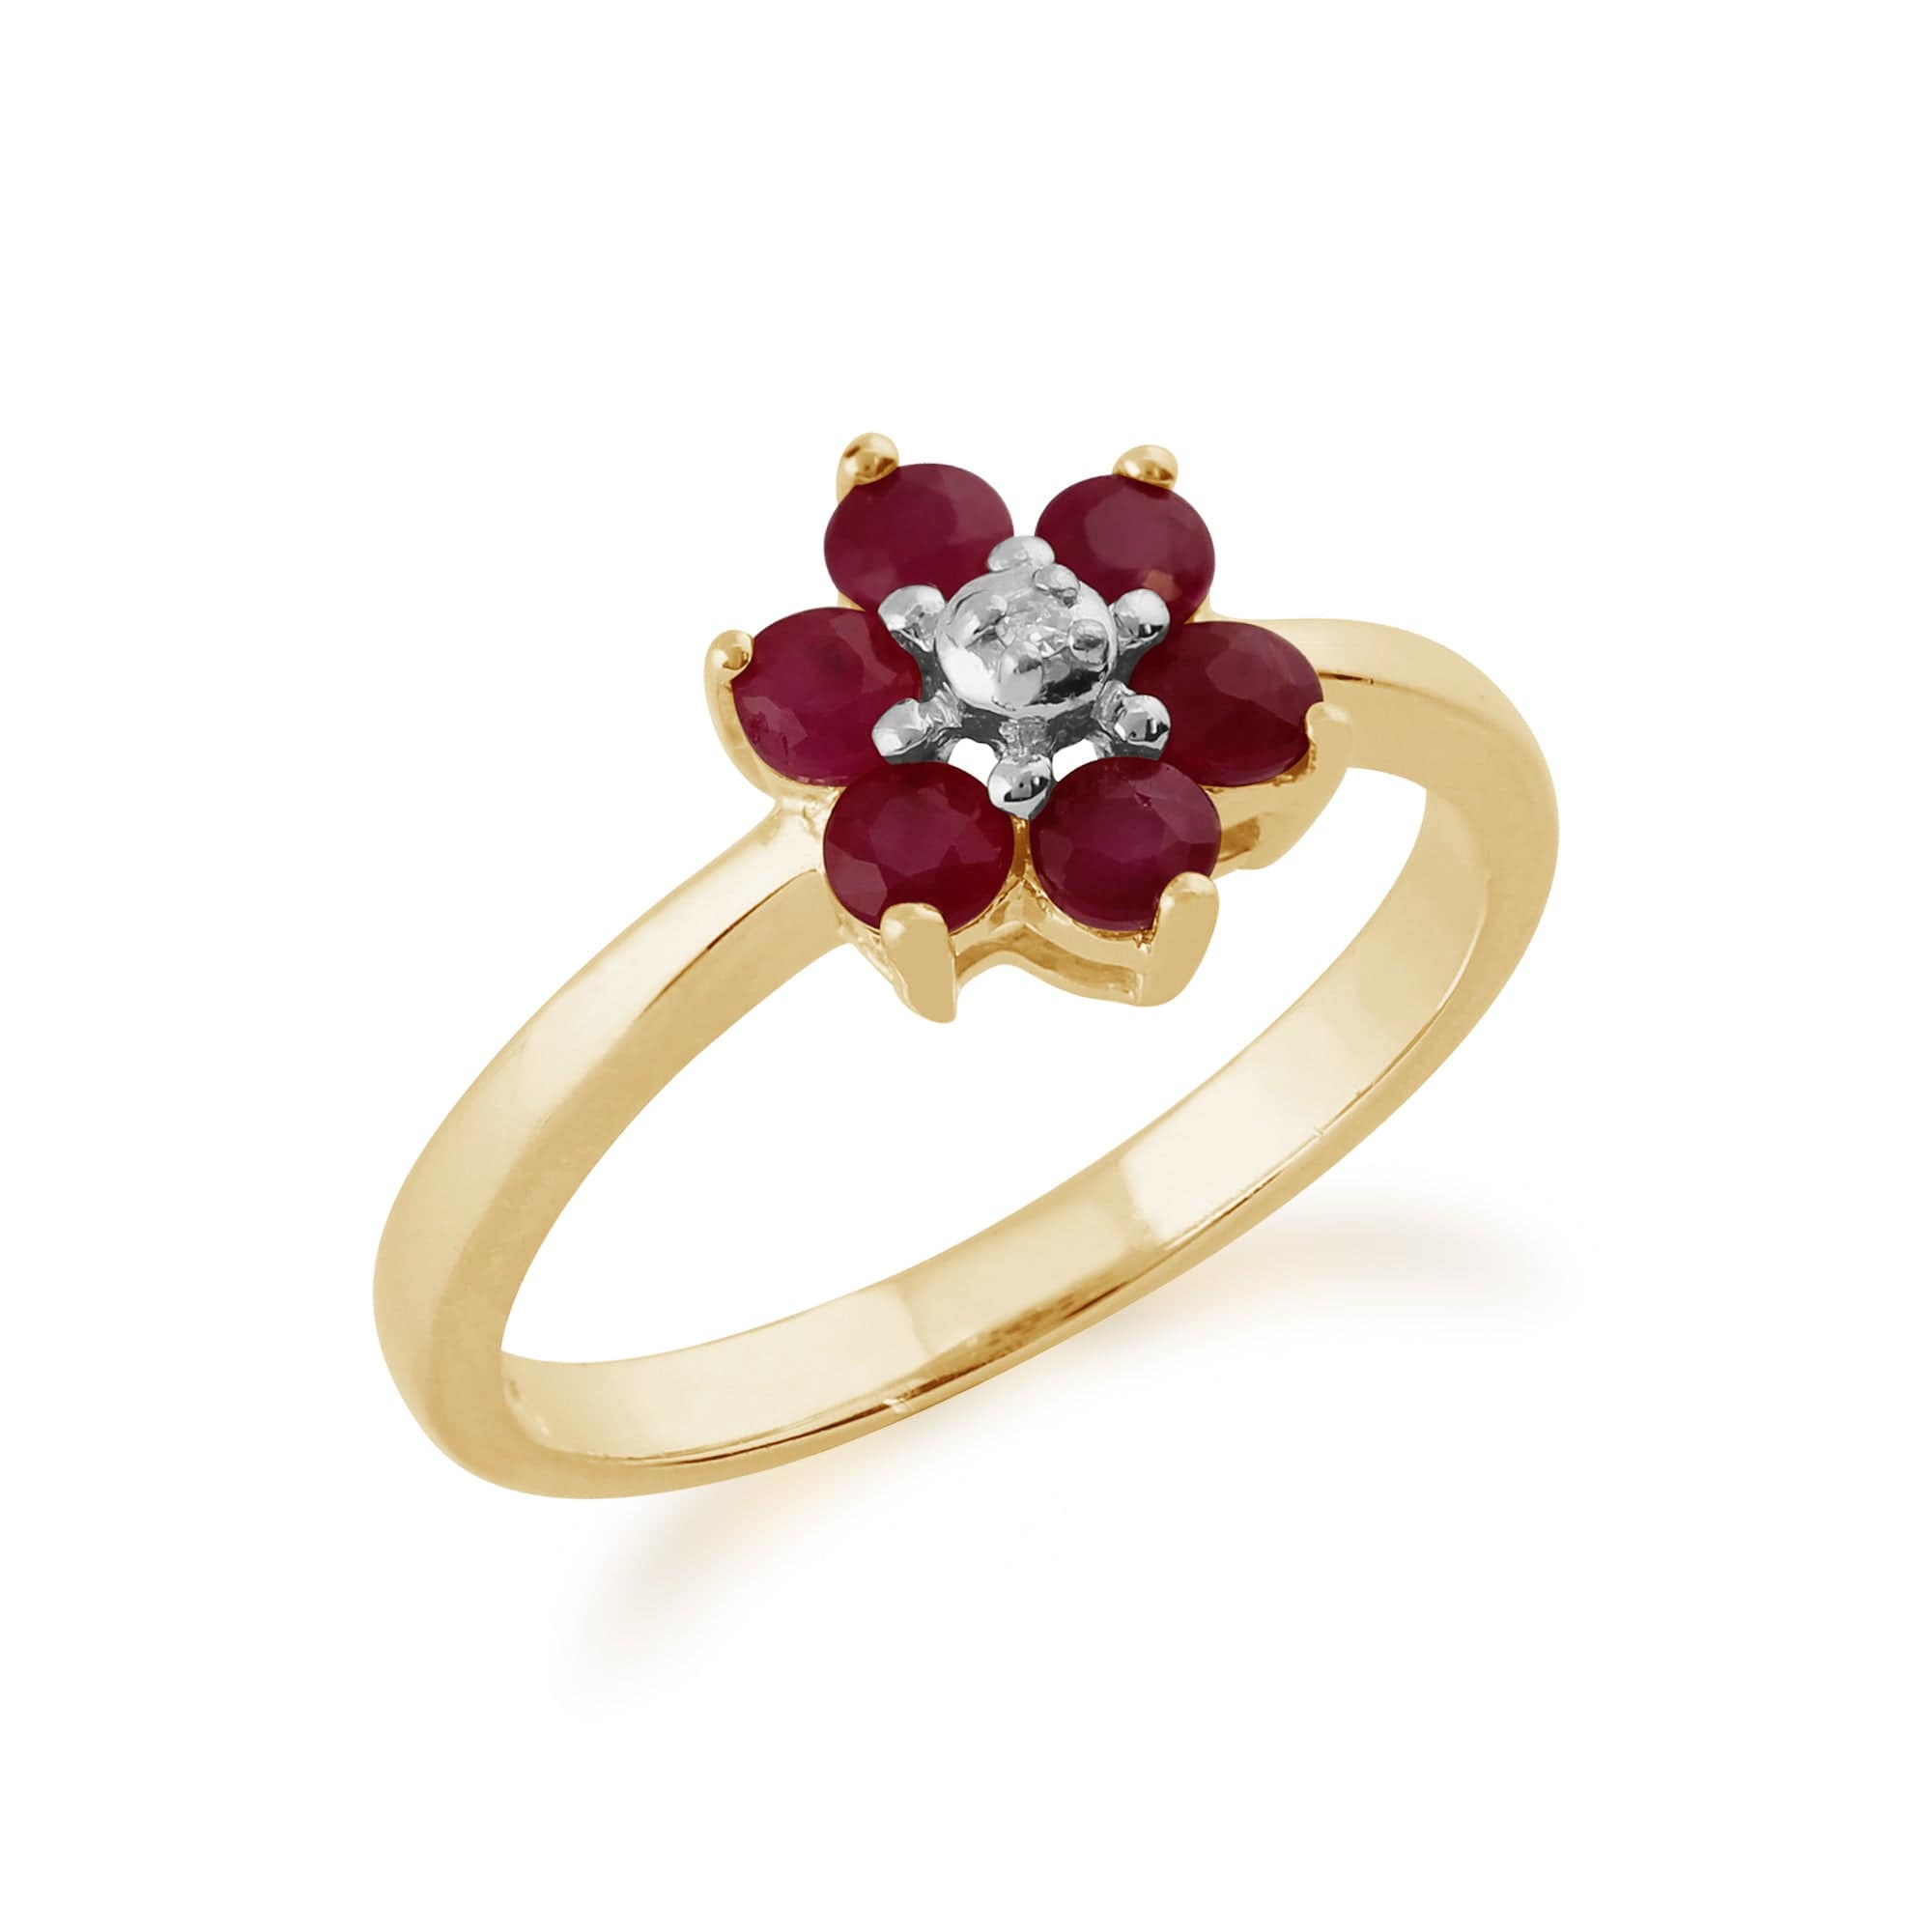 Floral Round Ruby & Diamond Cluster Ring in 9ct Yellow Gold - Gemondo